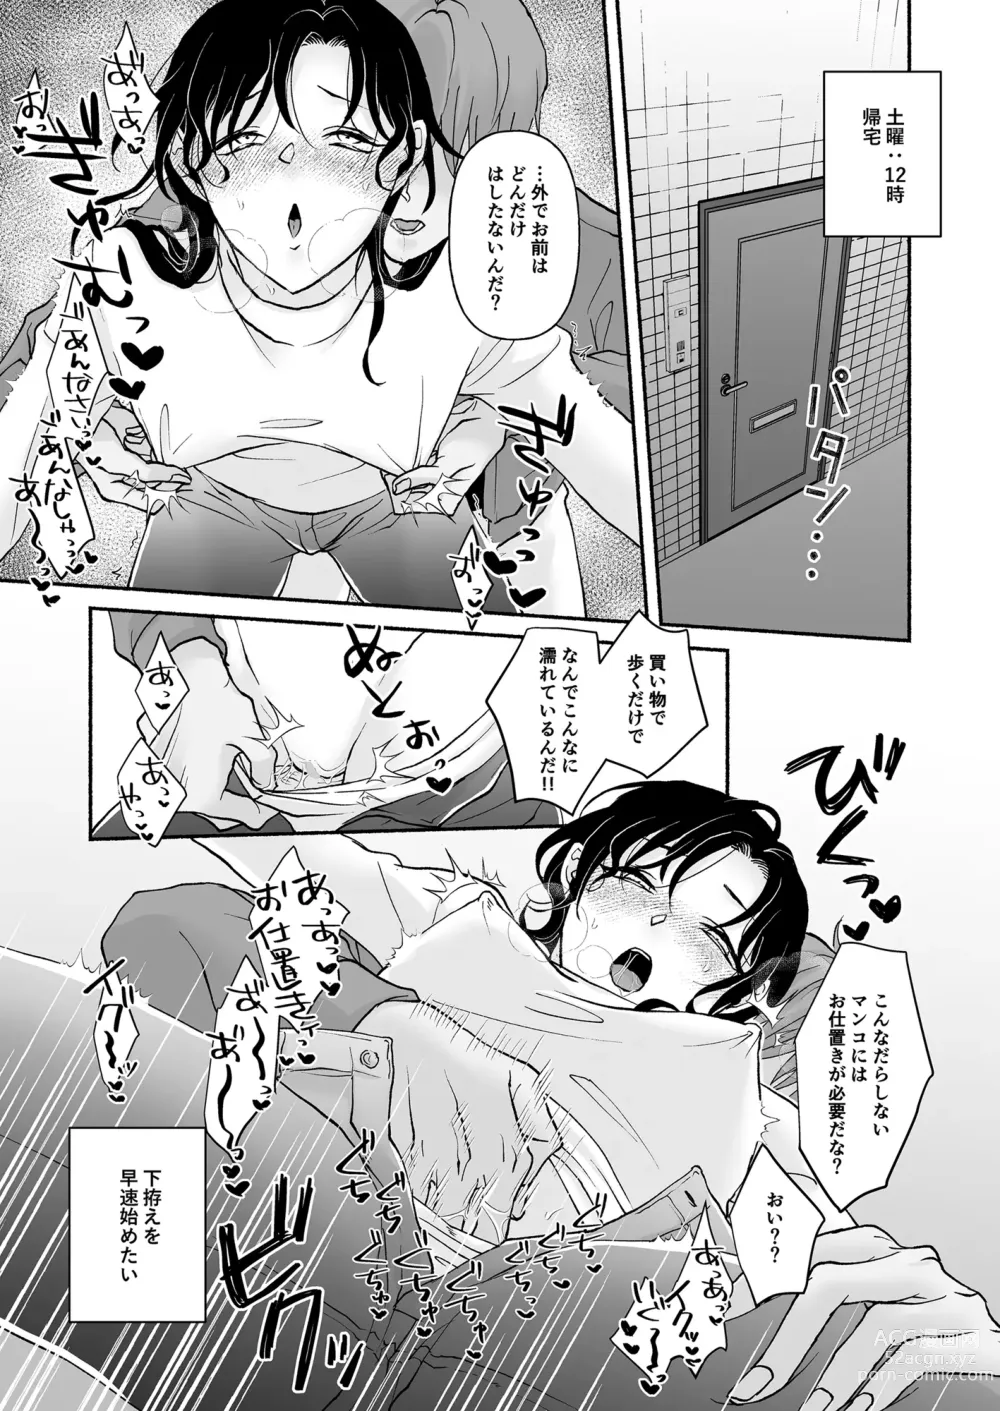 Page 11 of doujinshi Sex and Curry Rice